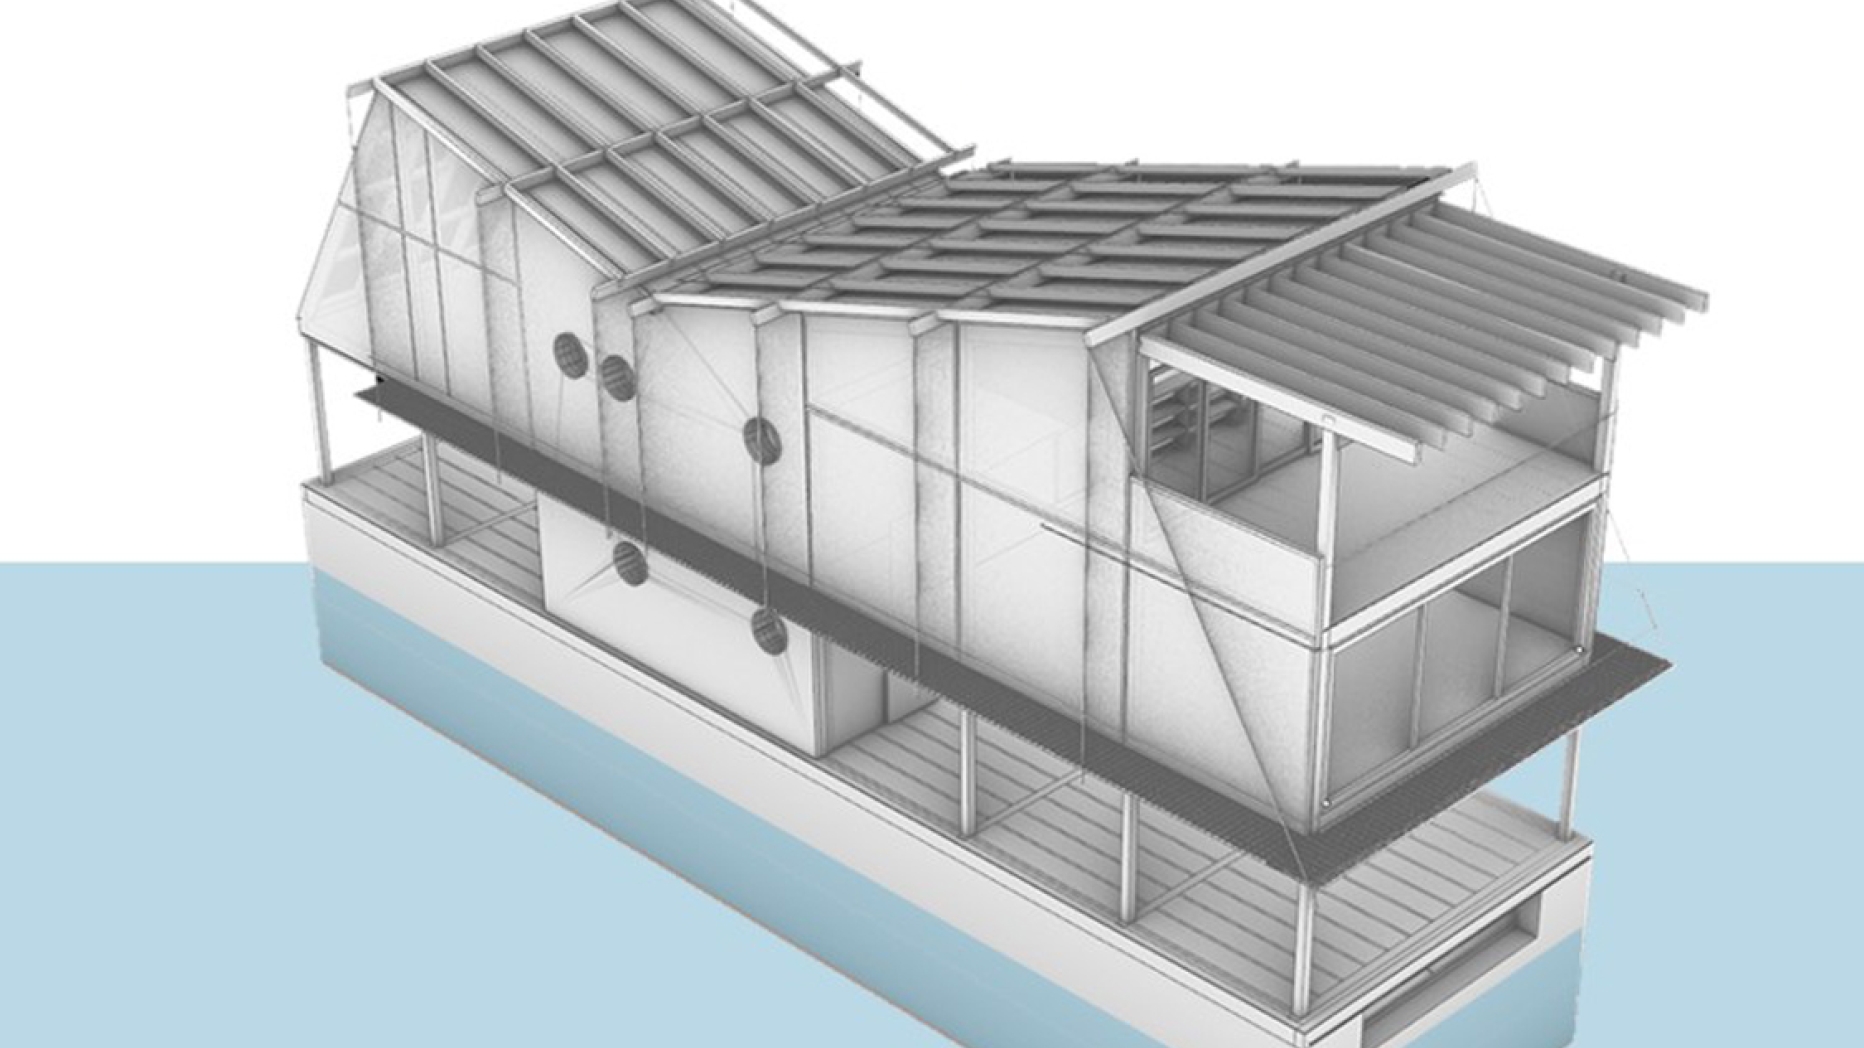 3D visualization of the Blue City Lab showing cocrete hull, slanted roof with solar panels and greebhouse space